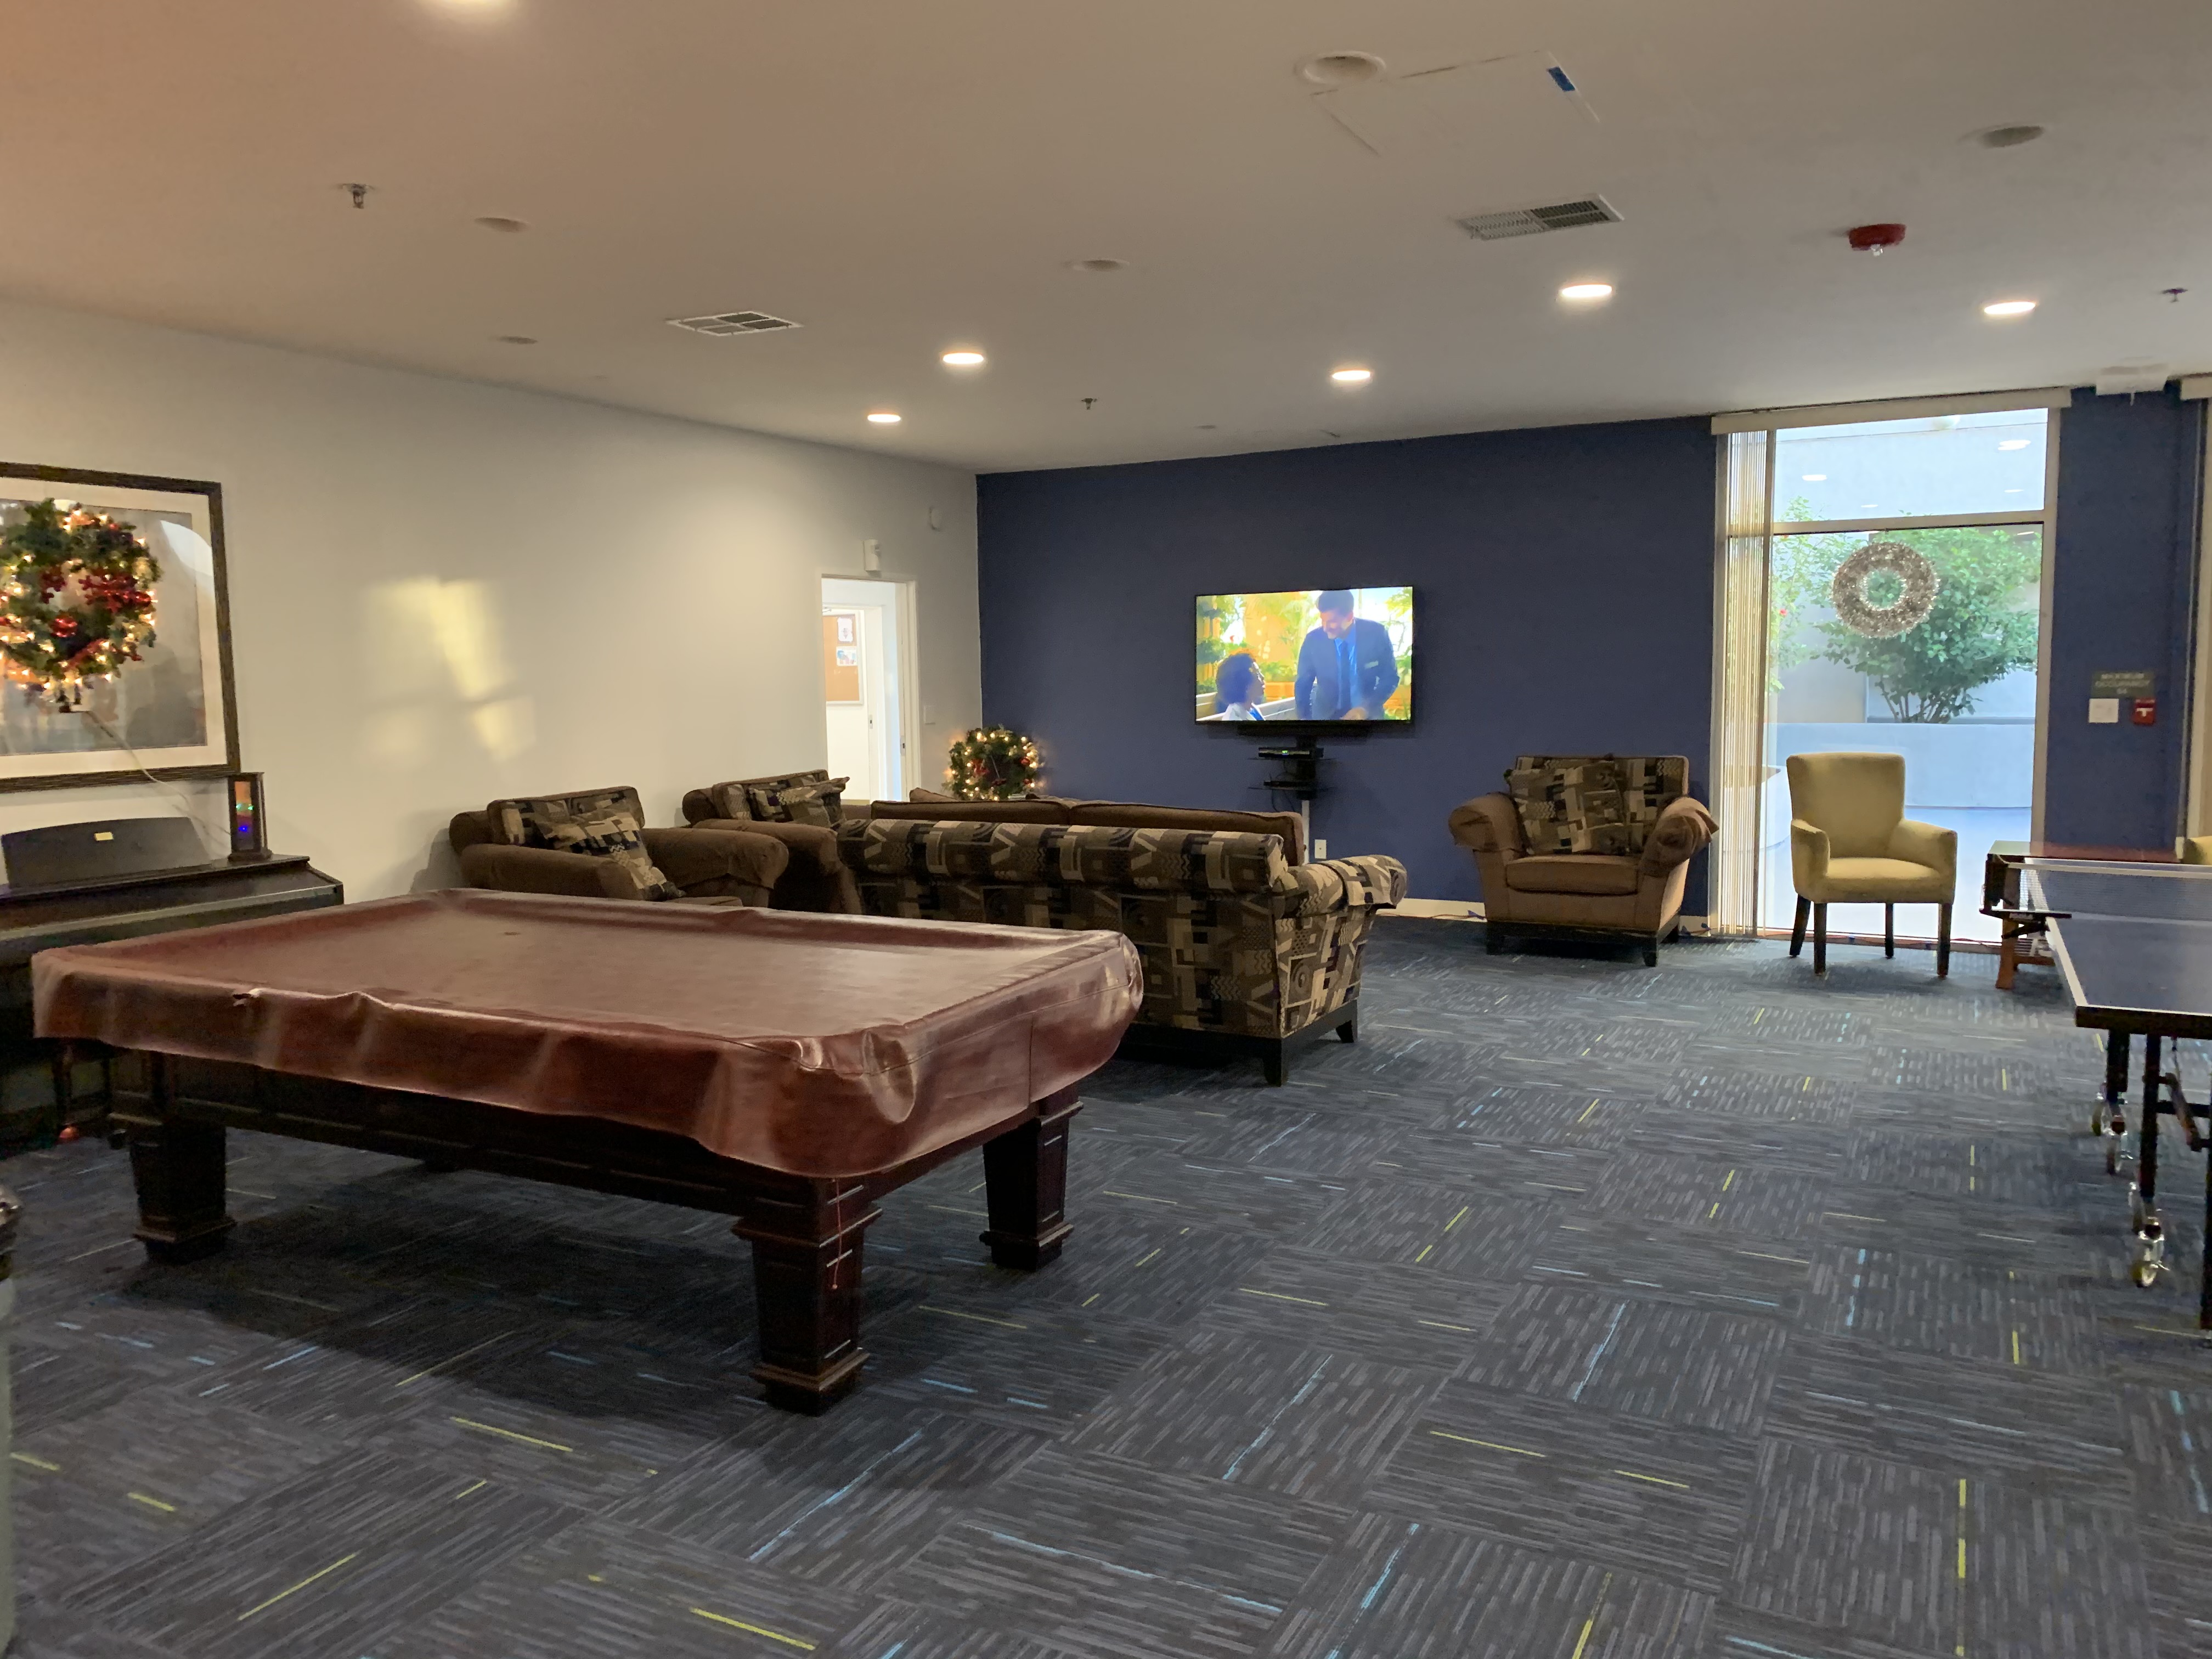 Community room that has a pool table, ping pong table, a piano, sofas, and a flat screen TV. There is a large window with vertical blinds.